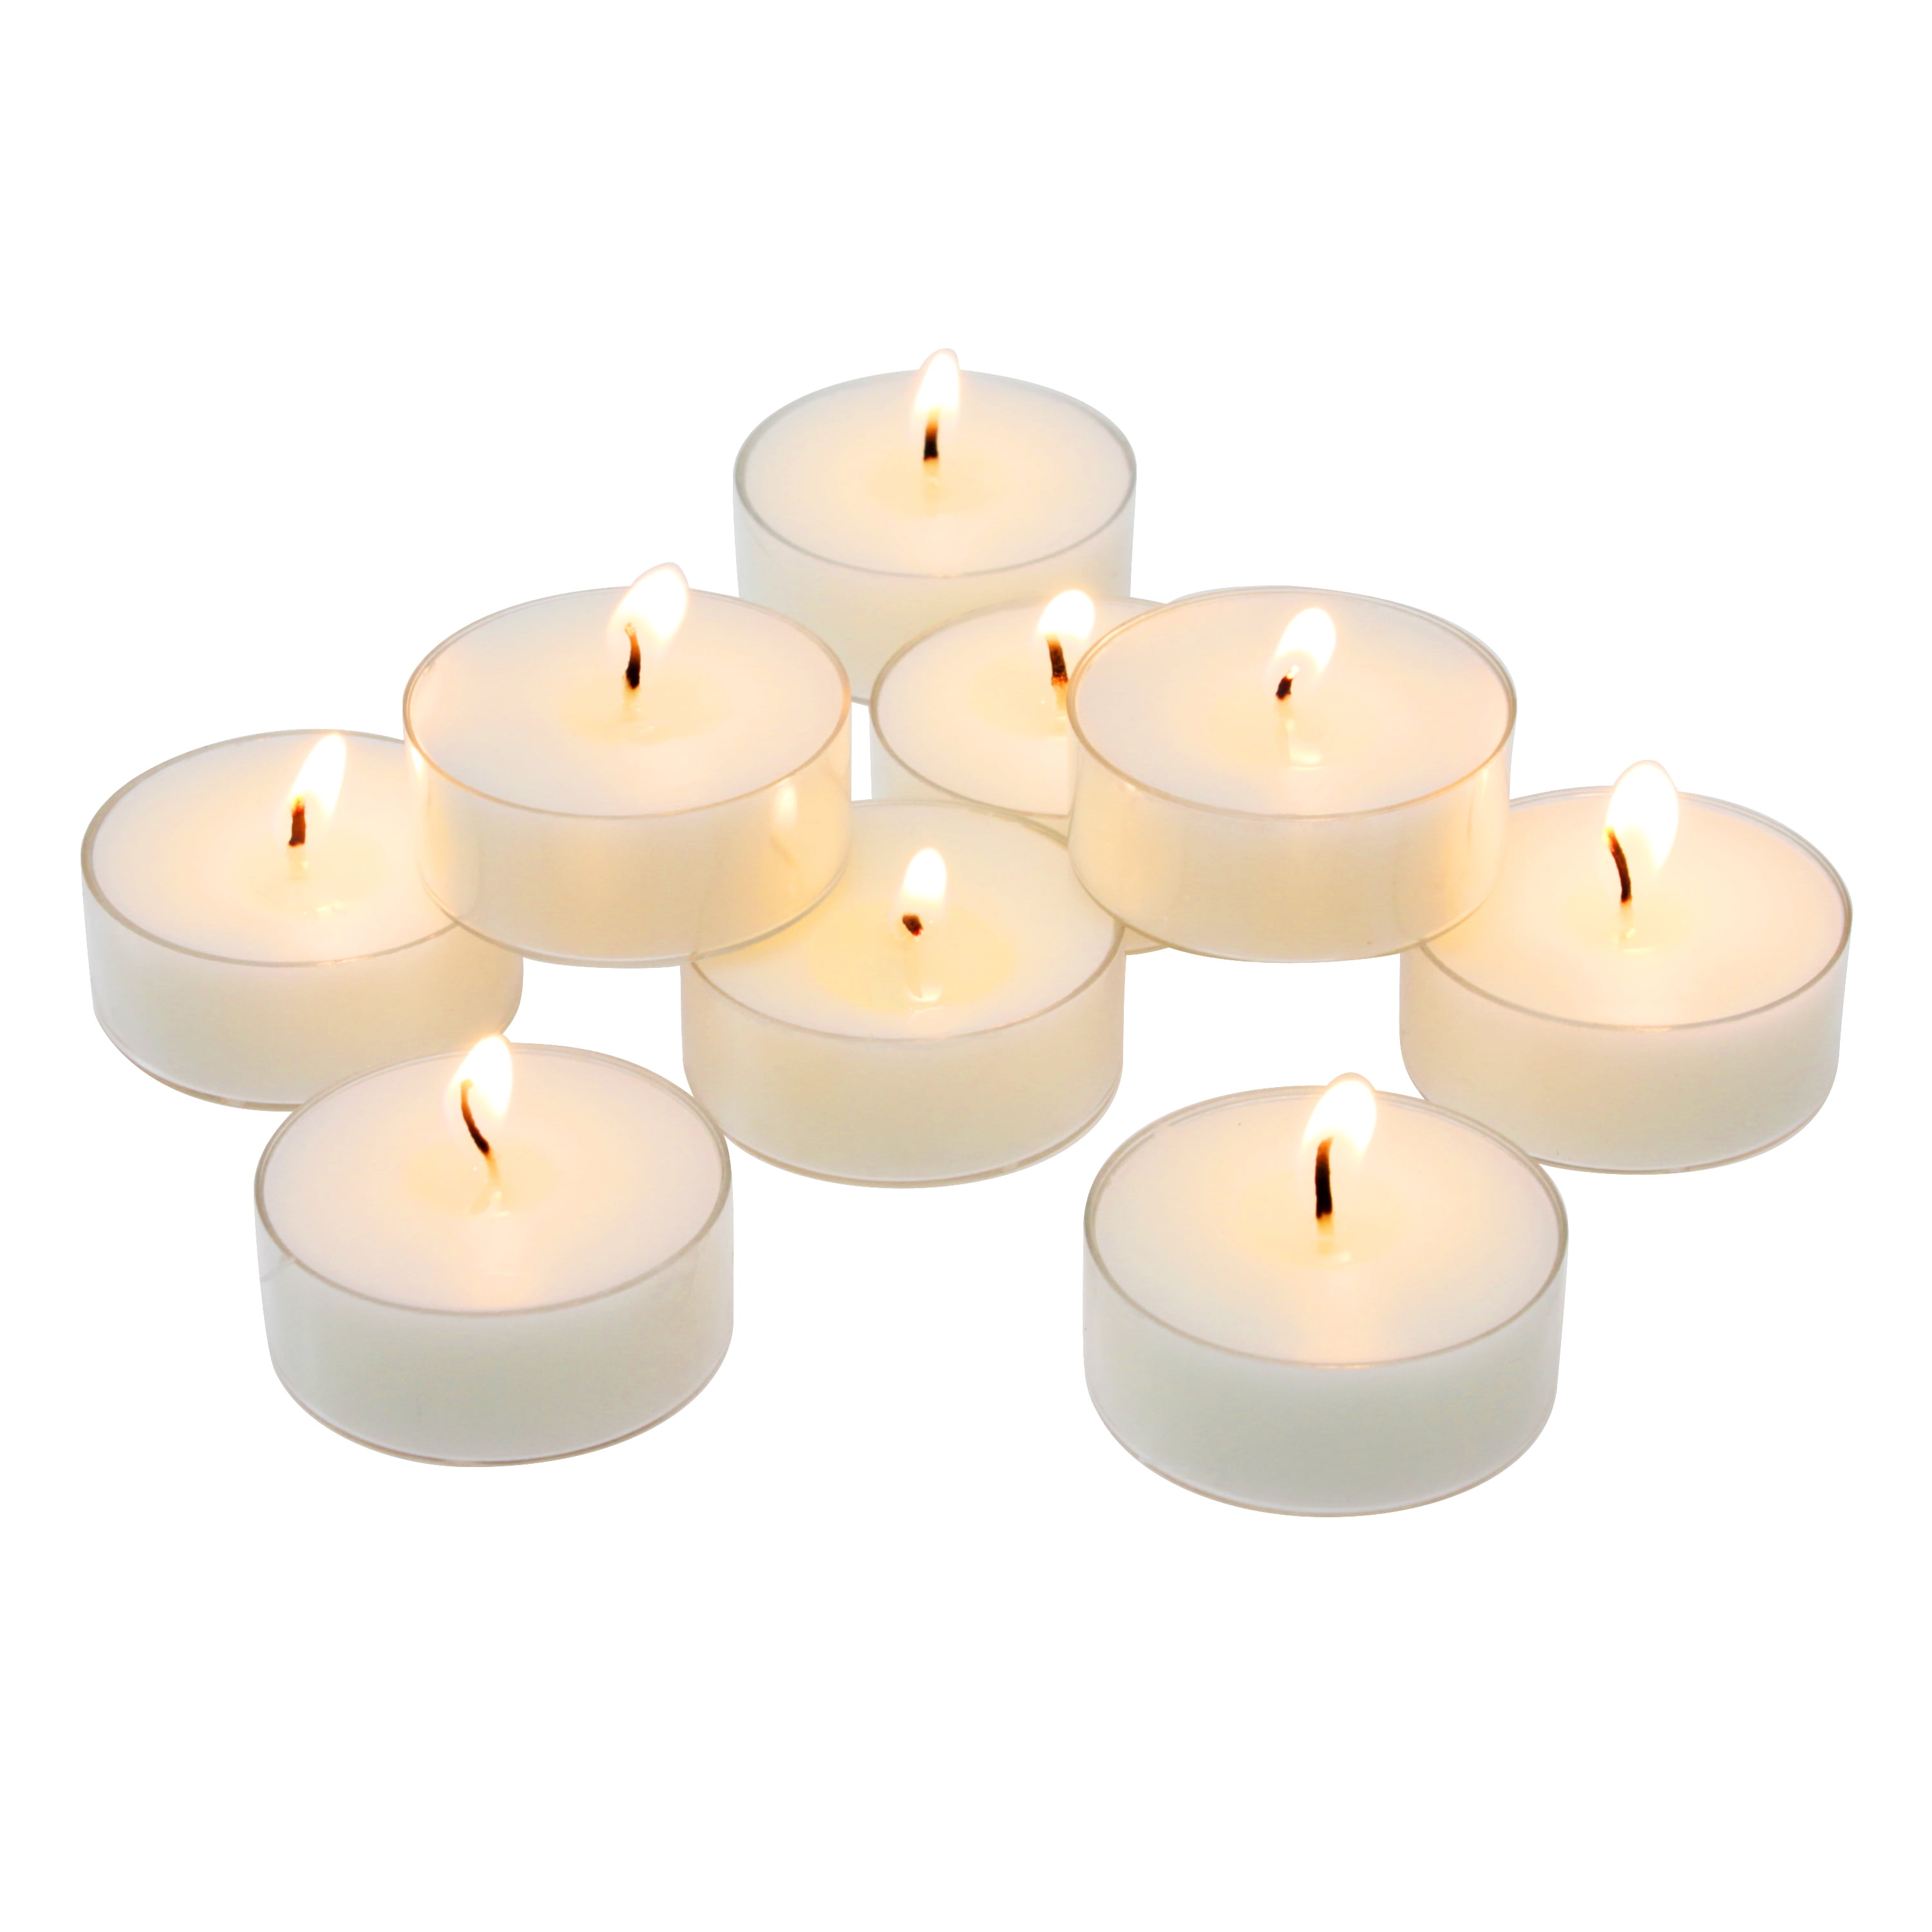 Set of 100 Yellow Citronella Scented Tea Light Candles Mega Candles 